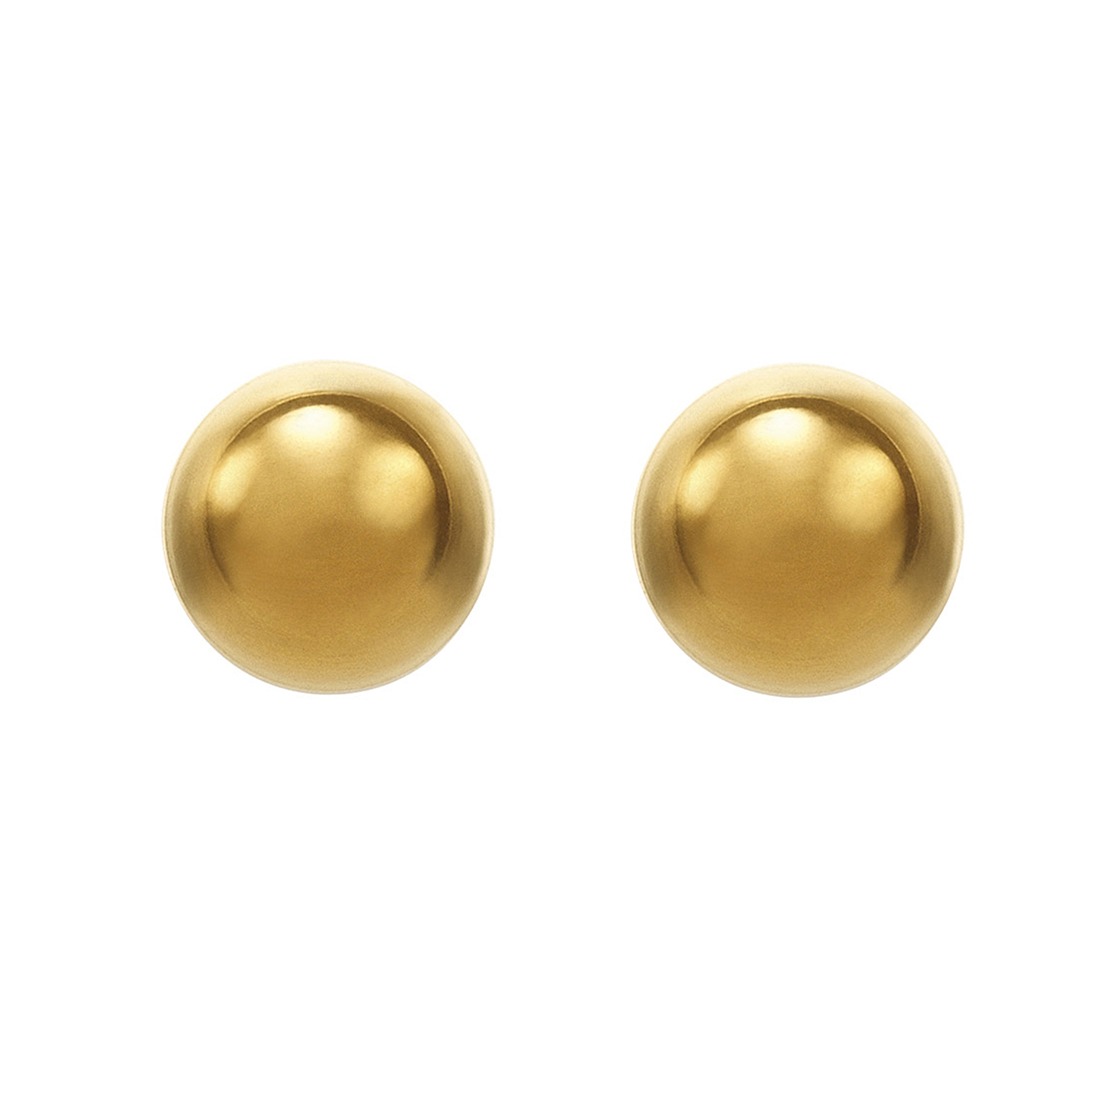 3MM - Ball | 24K Gold Plated Piercing Earrings with Ear Piercing Cartridge | Studex System75